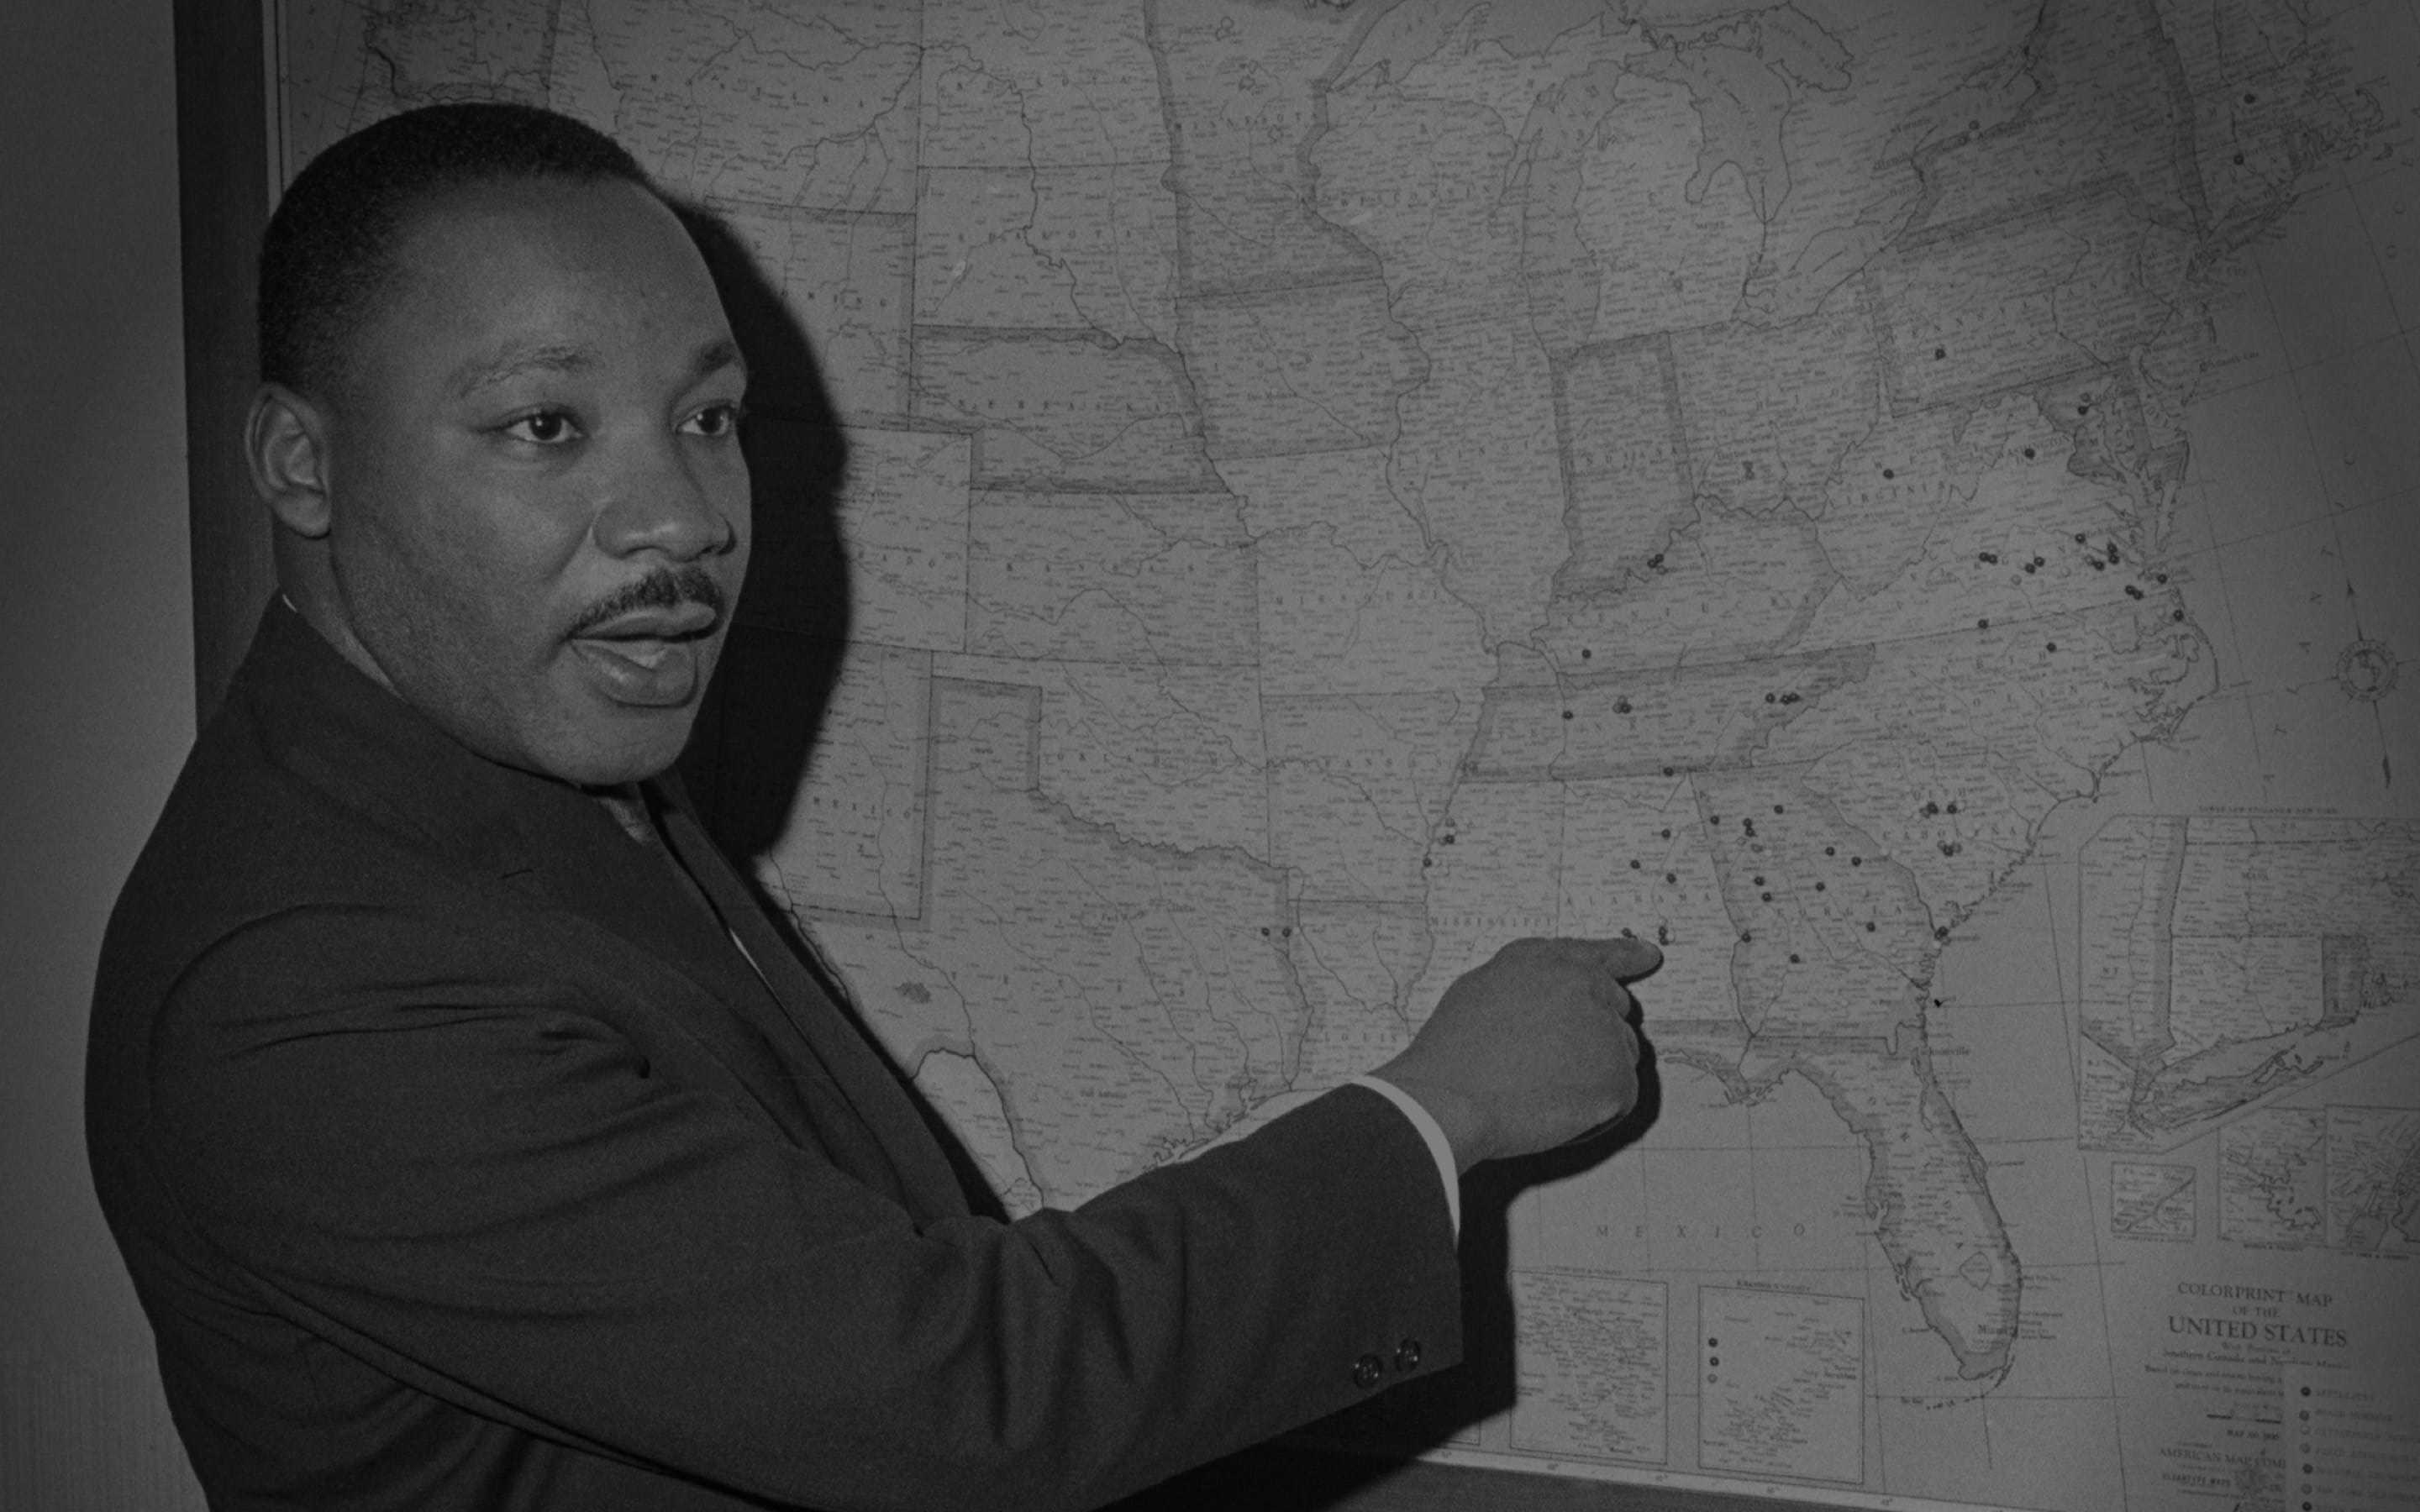 Martin Luther King pointing to Selma on a map